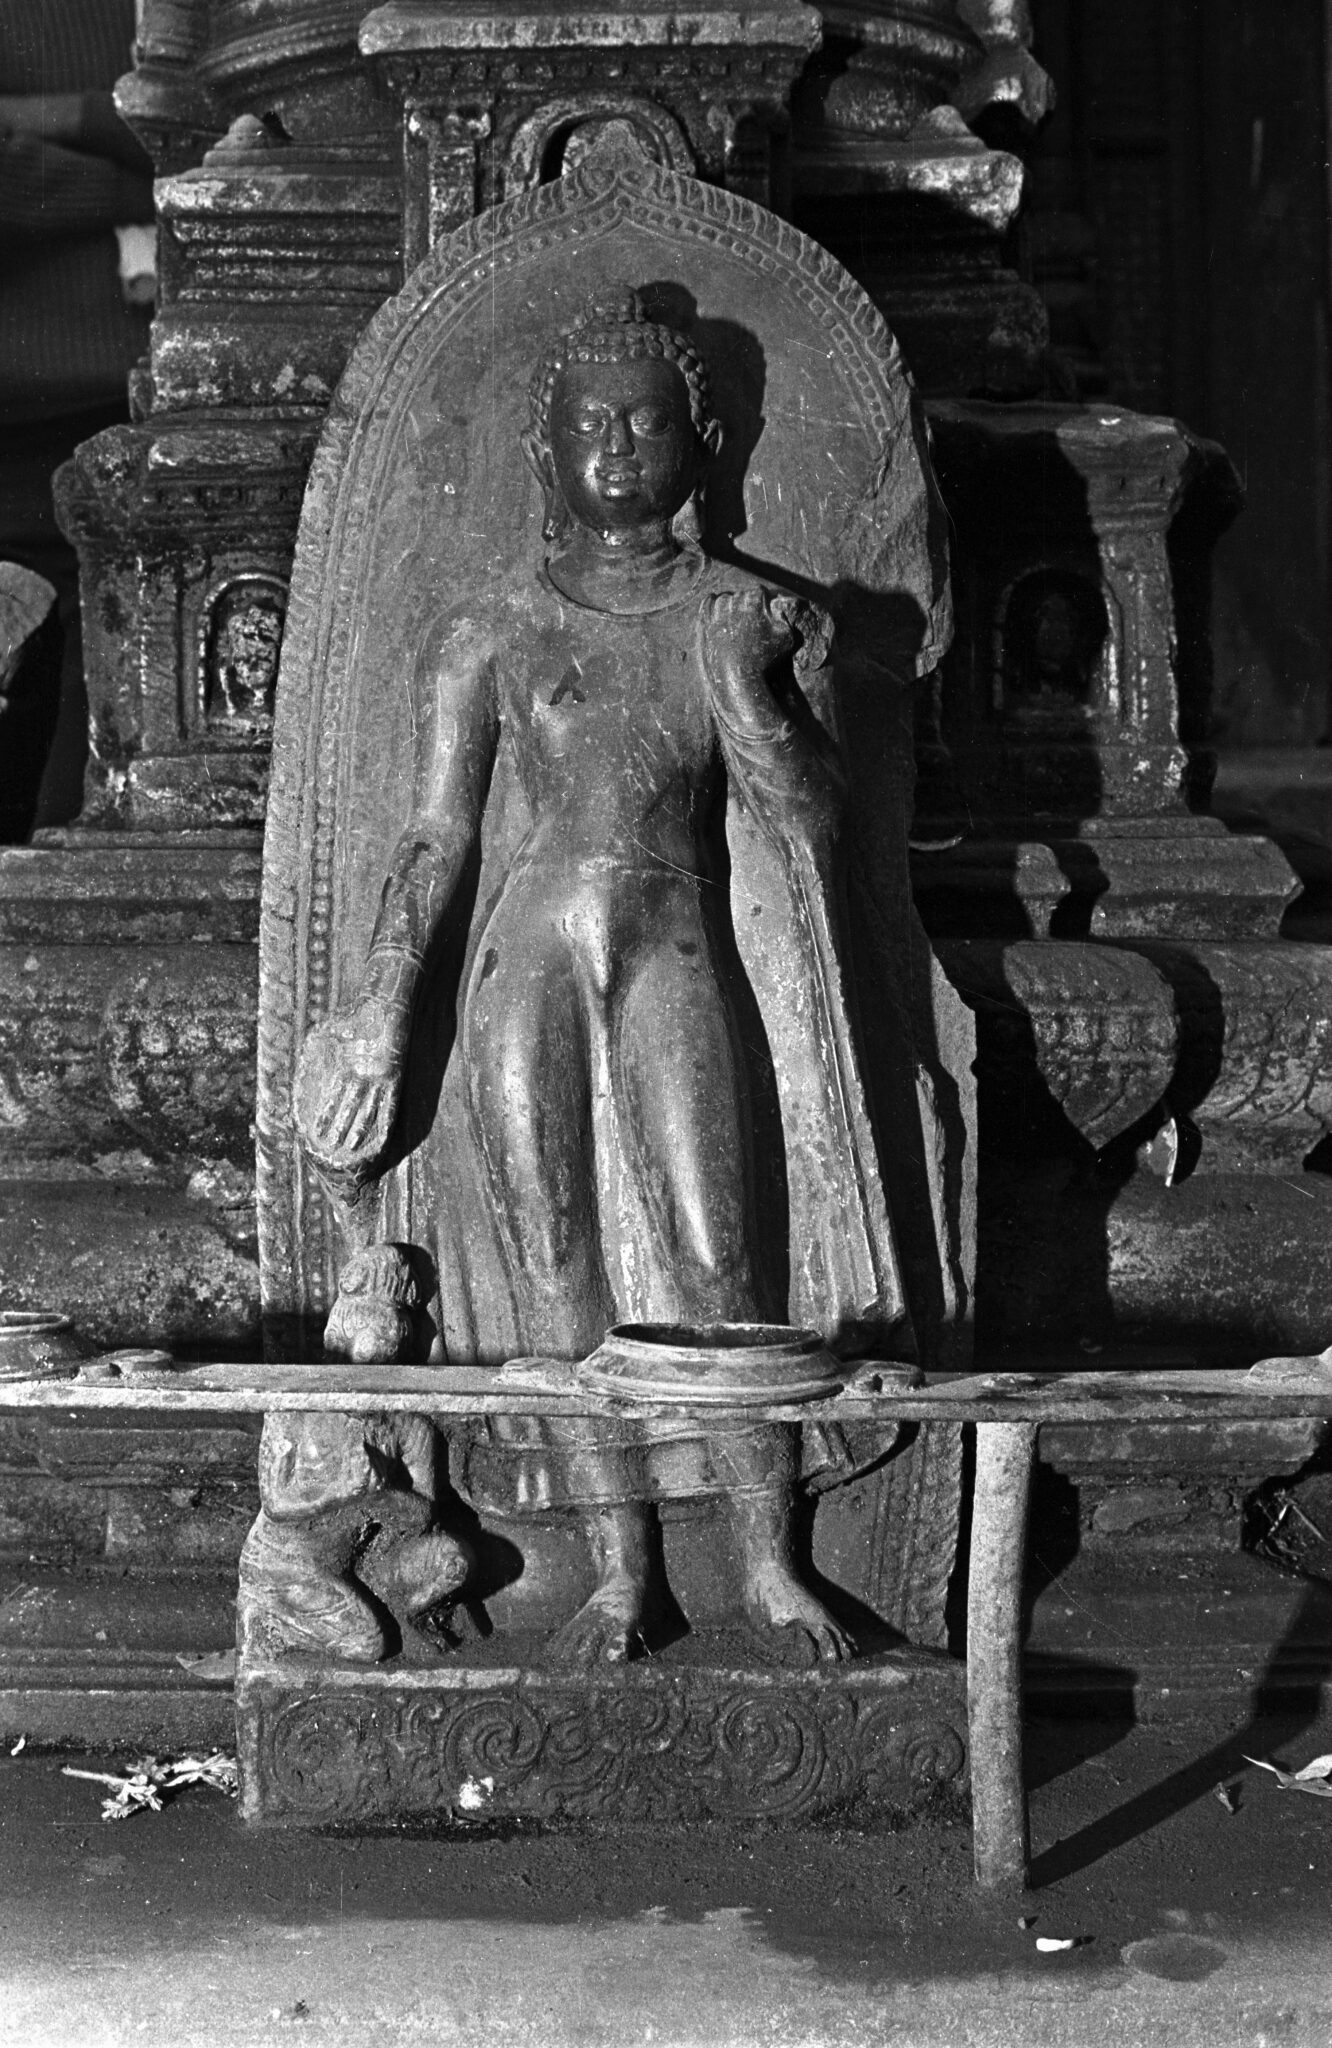 Black and white photograph of relief sculpture depicting Buddha and attendant situated before tiered architectonic sculpture